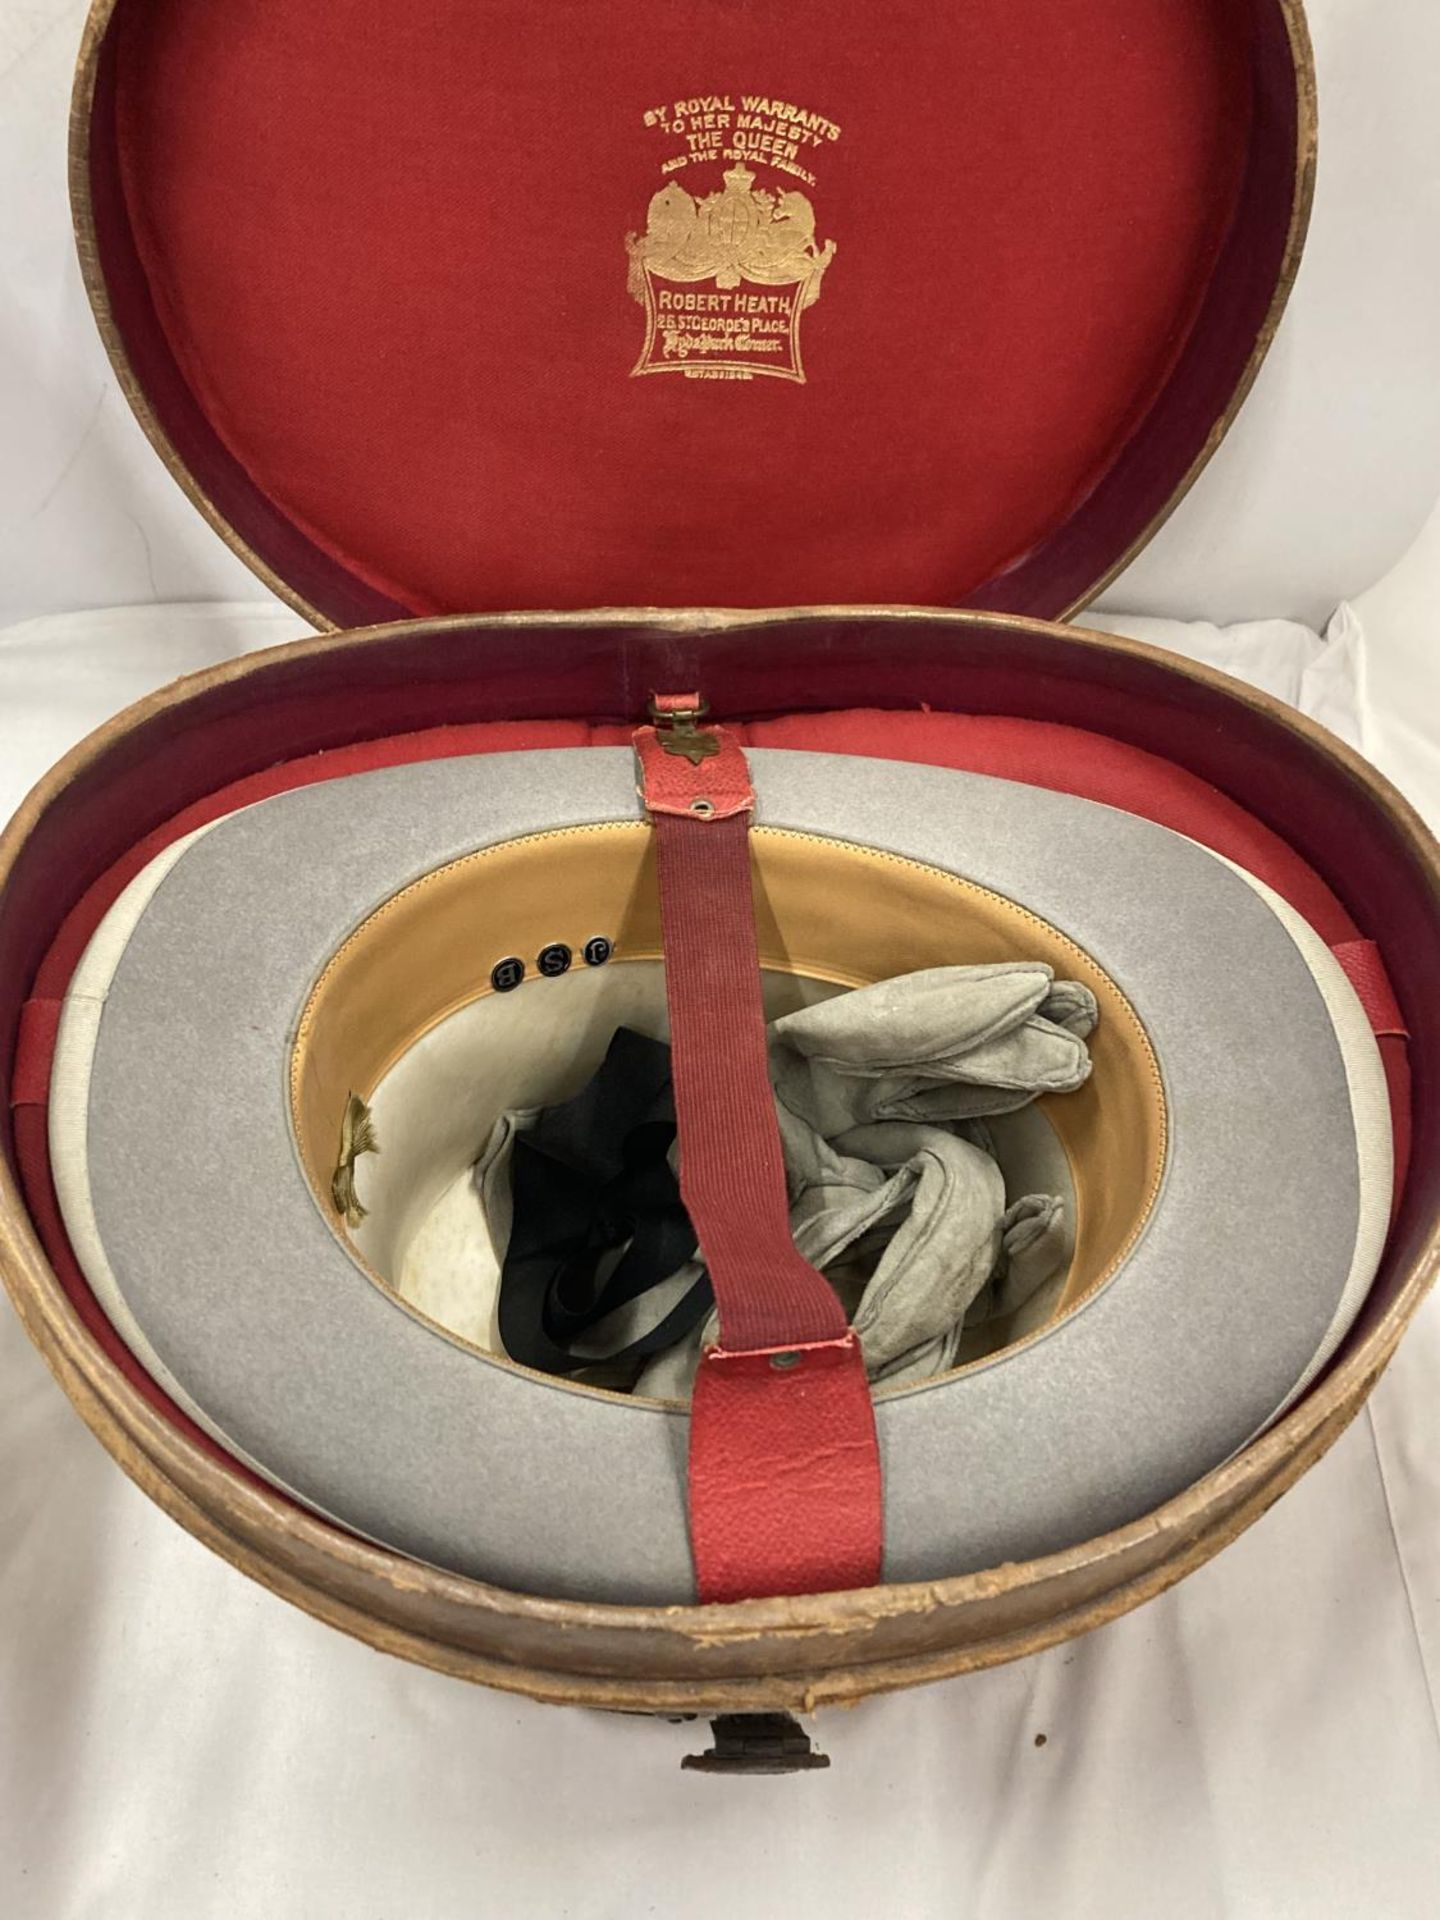 A VINTAGE WOODROW PICCADILLY LONDON GREY TOP HAT AND GLOVES IN A ROBERT HEATH LEATHER HAT BOX - Image 5 of 6